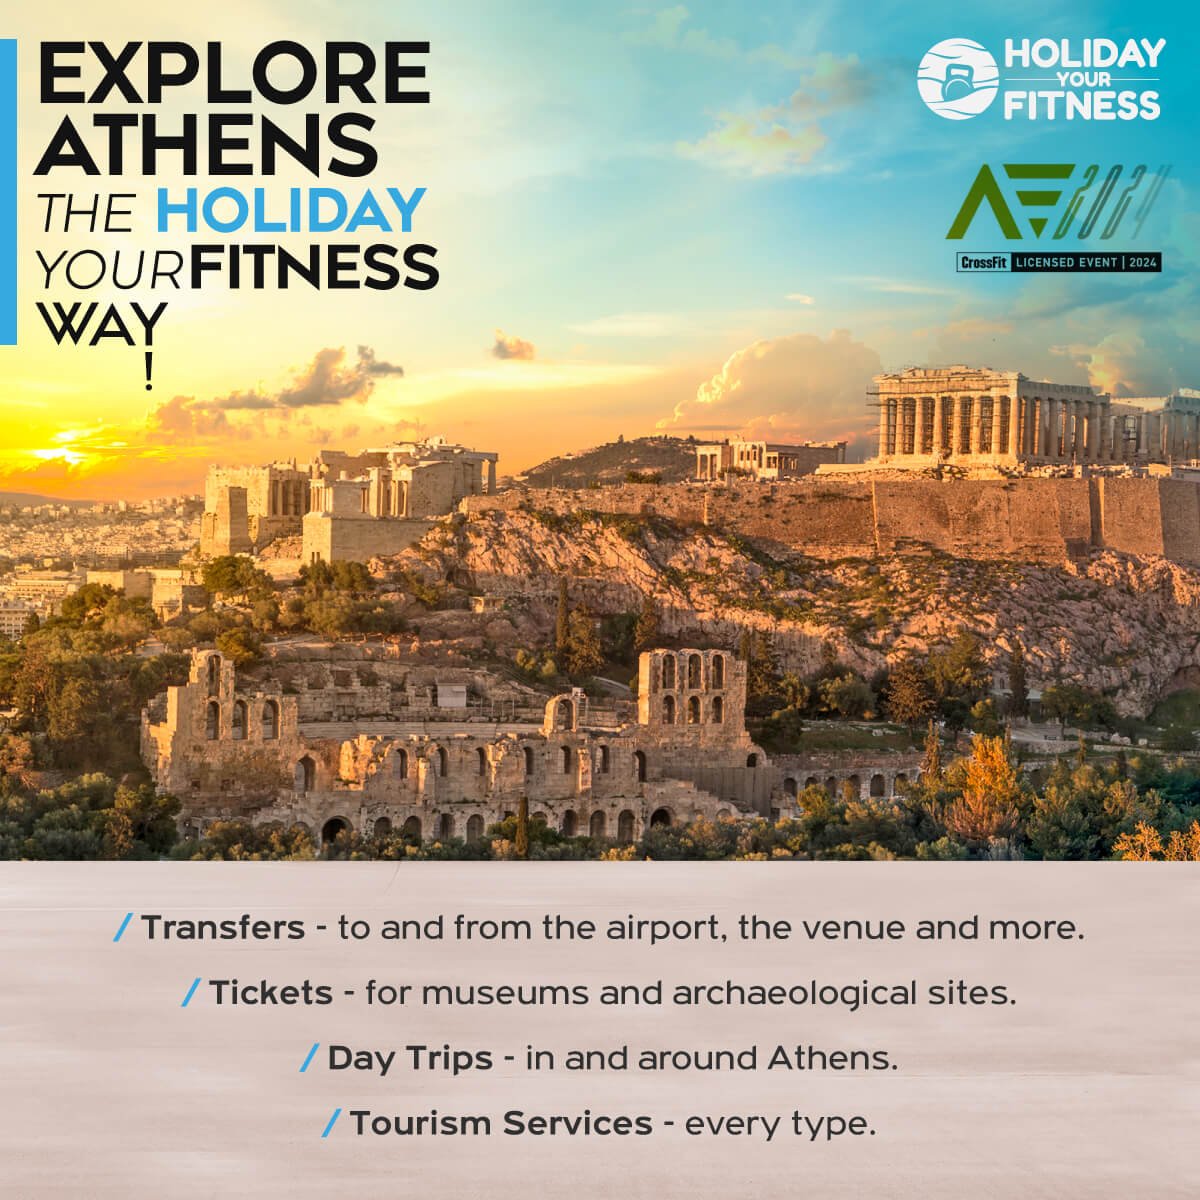 Acropolis at sunrise with the logos of Athens Throwdown and Holiday your Fitness on it.